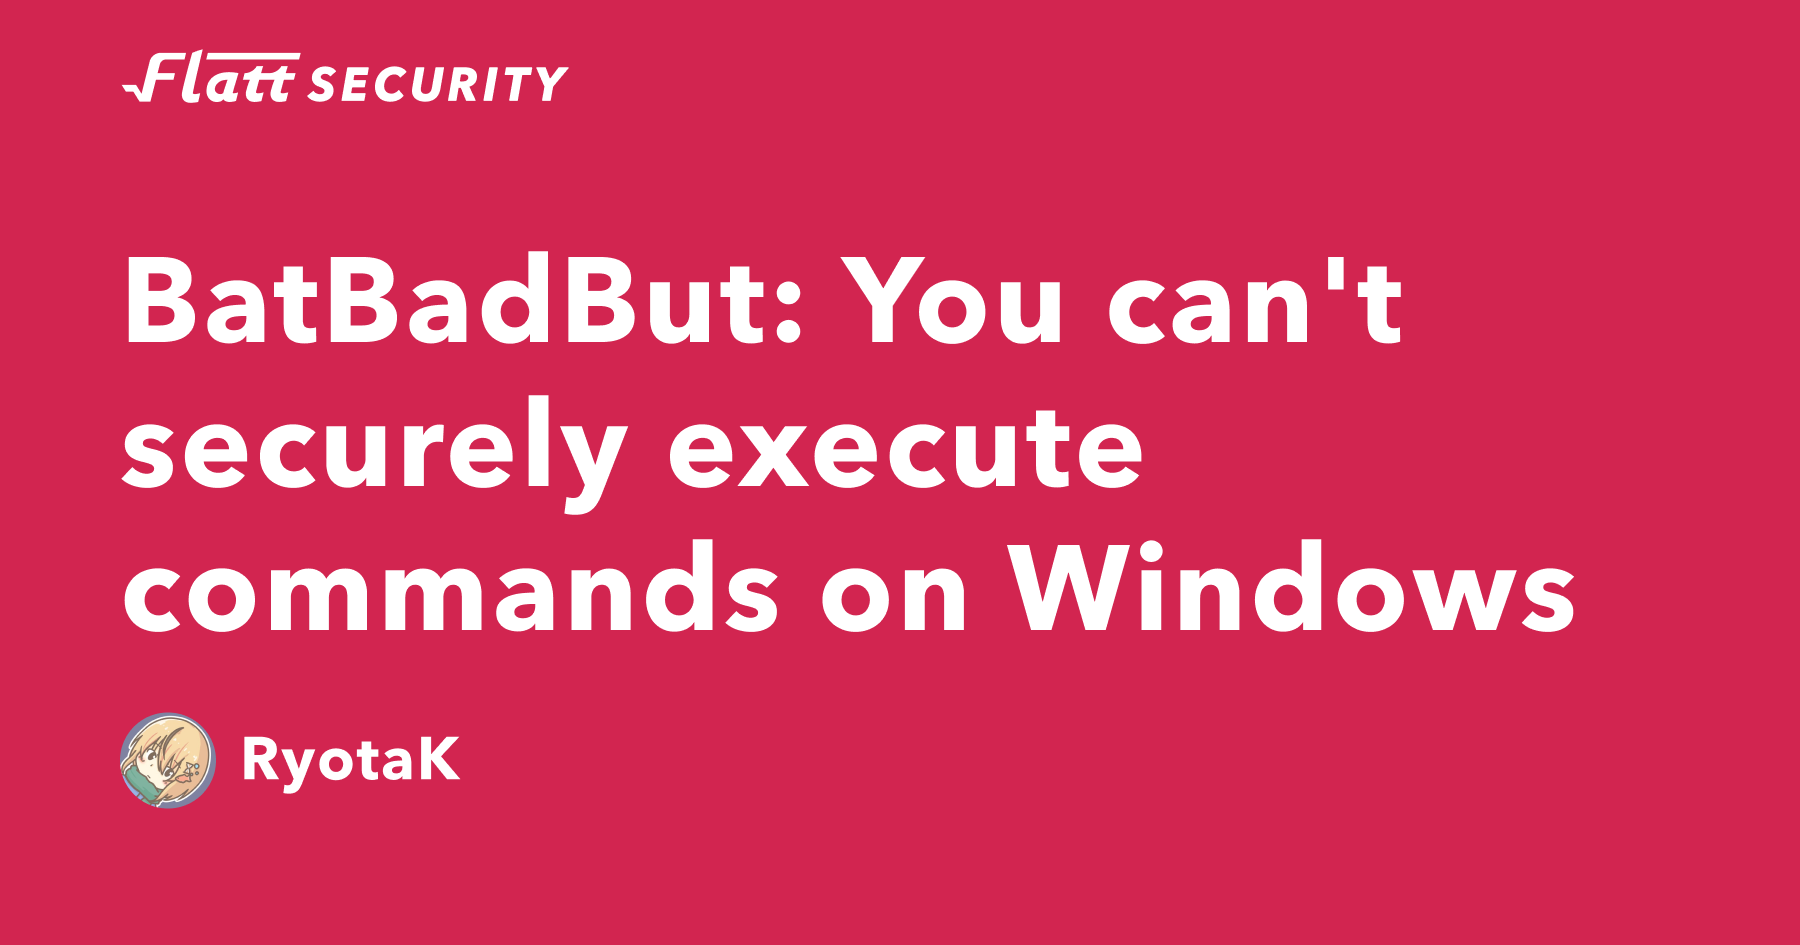 BatBadBut: You can't securely execute commands on Windows